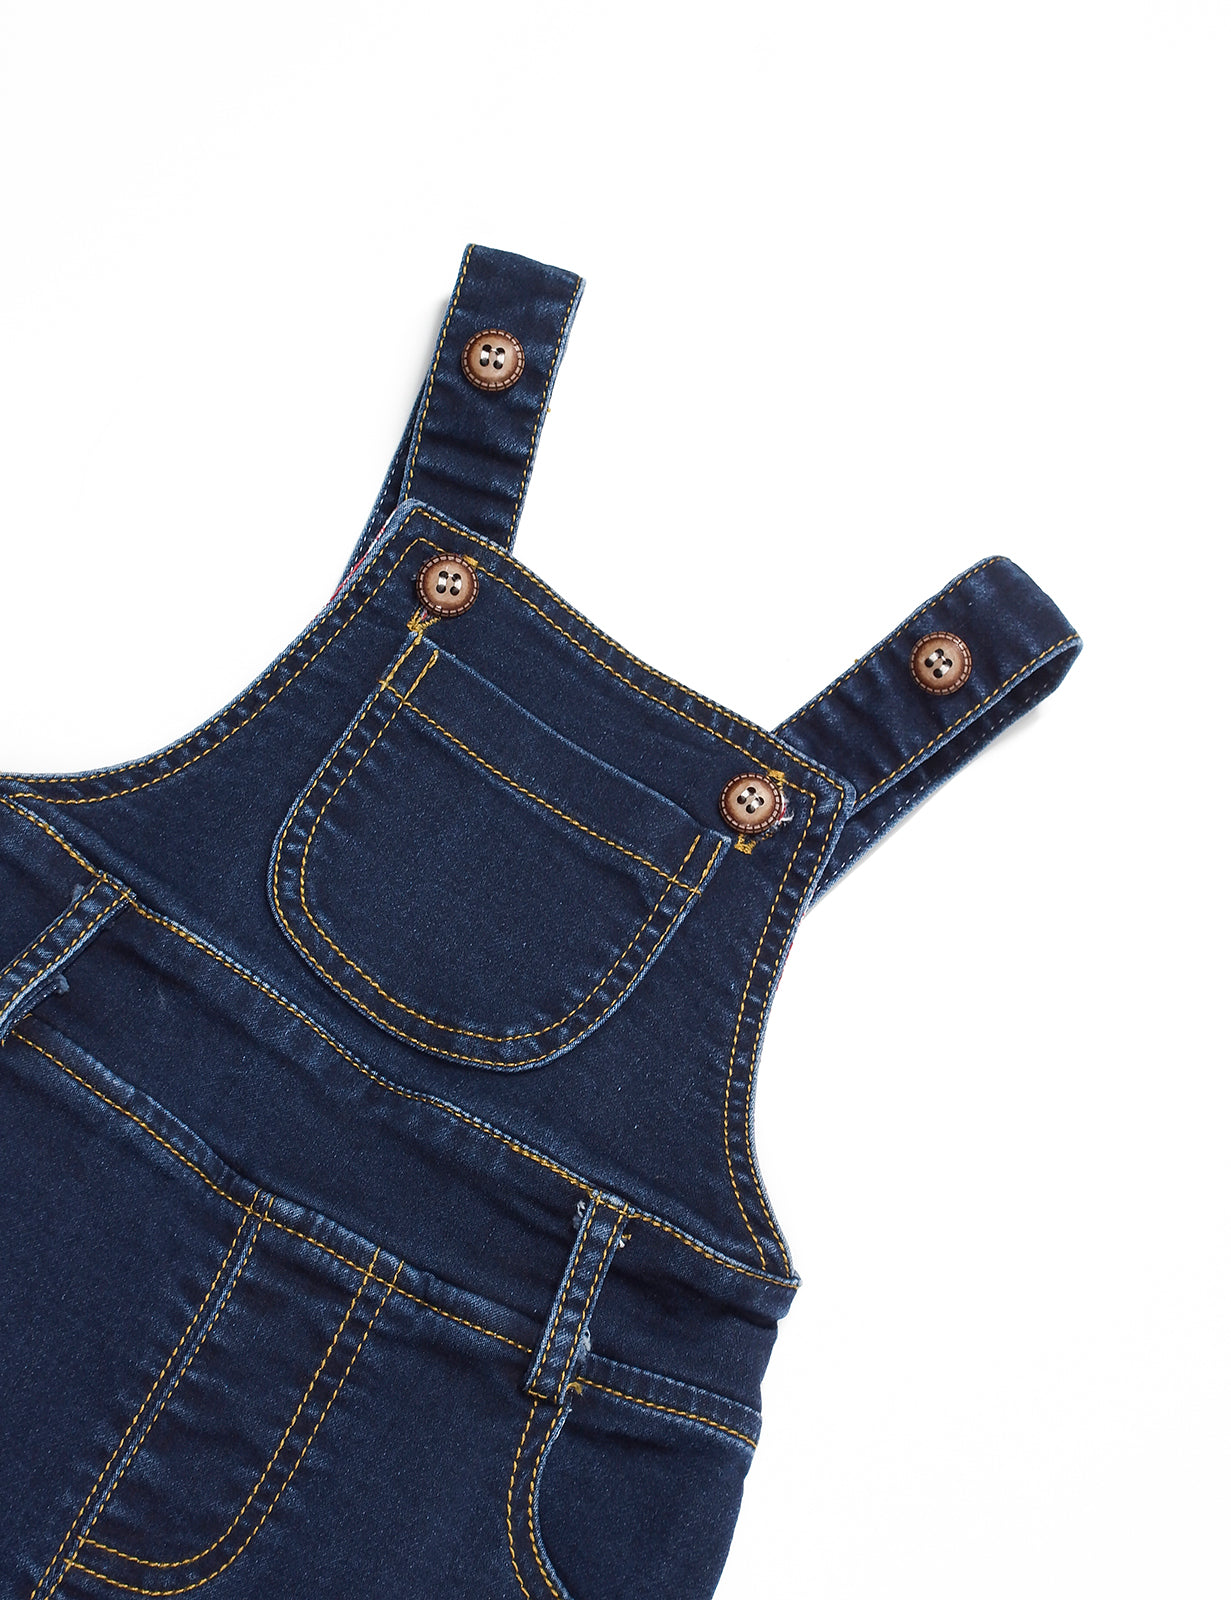 Toddler Water Washed Ripped Soft Denim Overalls